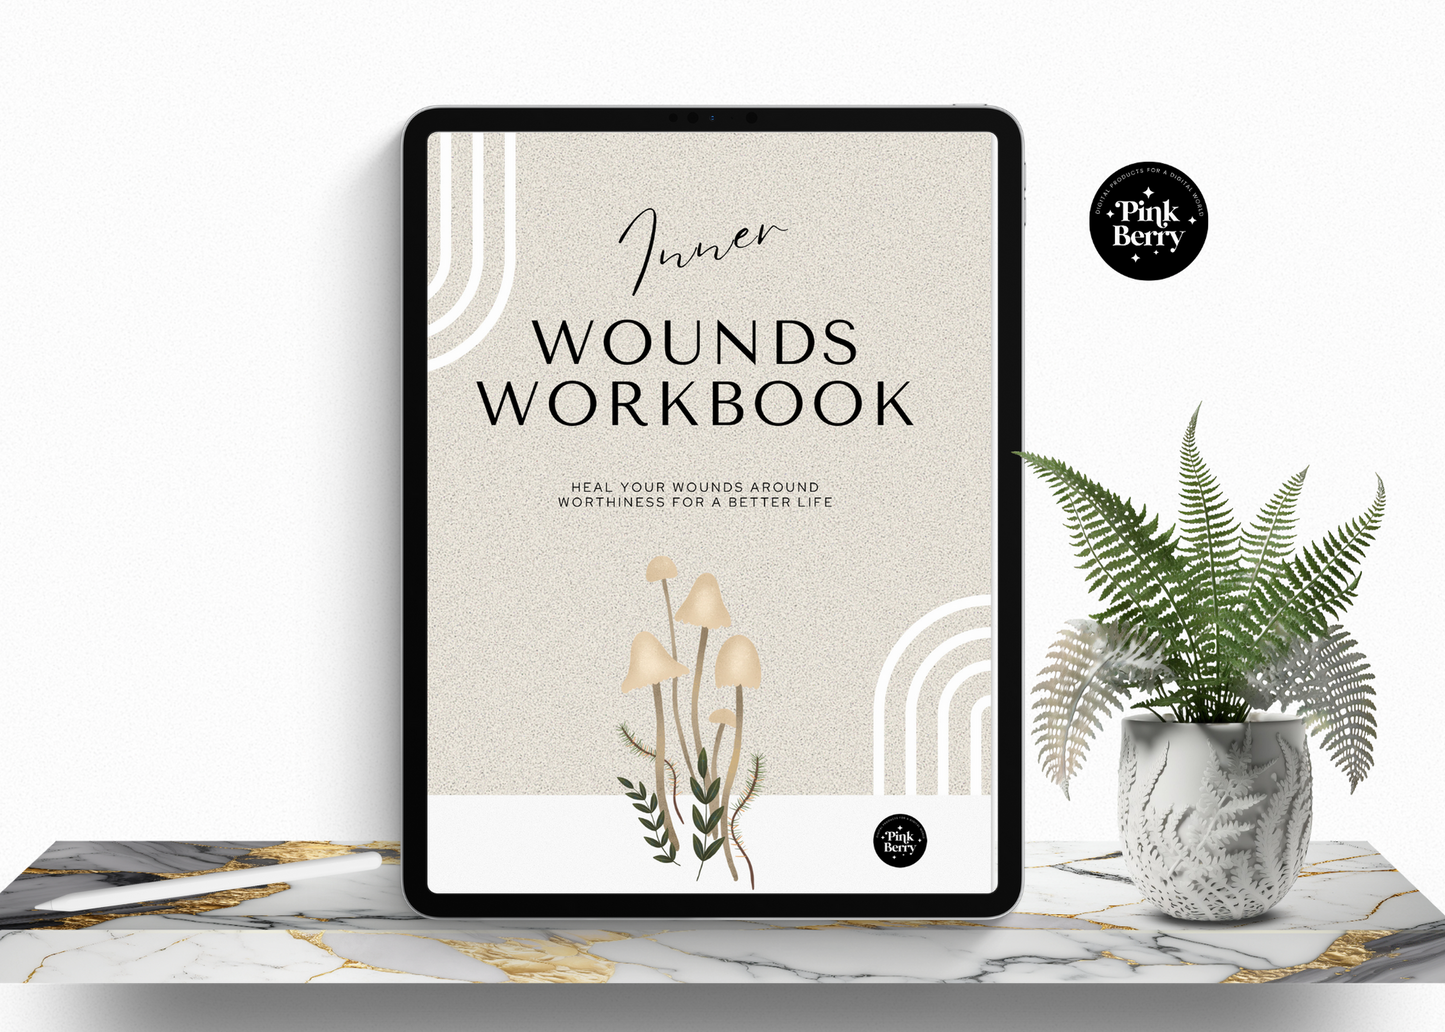 Inner Core Wounds Digital Workbook-52 Page Goodnotes Digital Workbook- 6 Steps With Writing Prompts Media 1 of 8